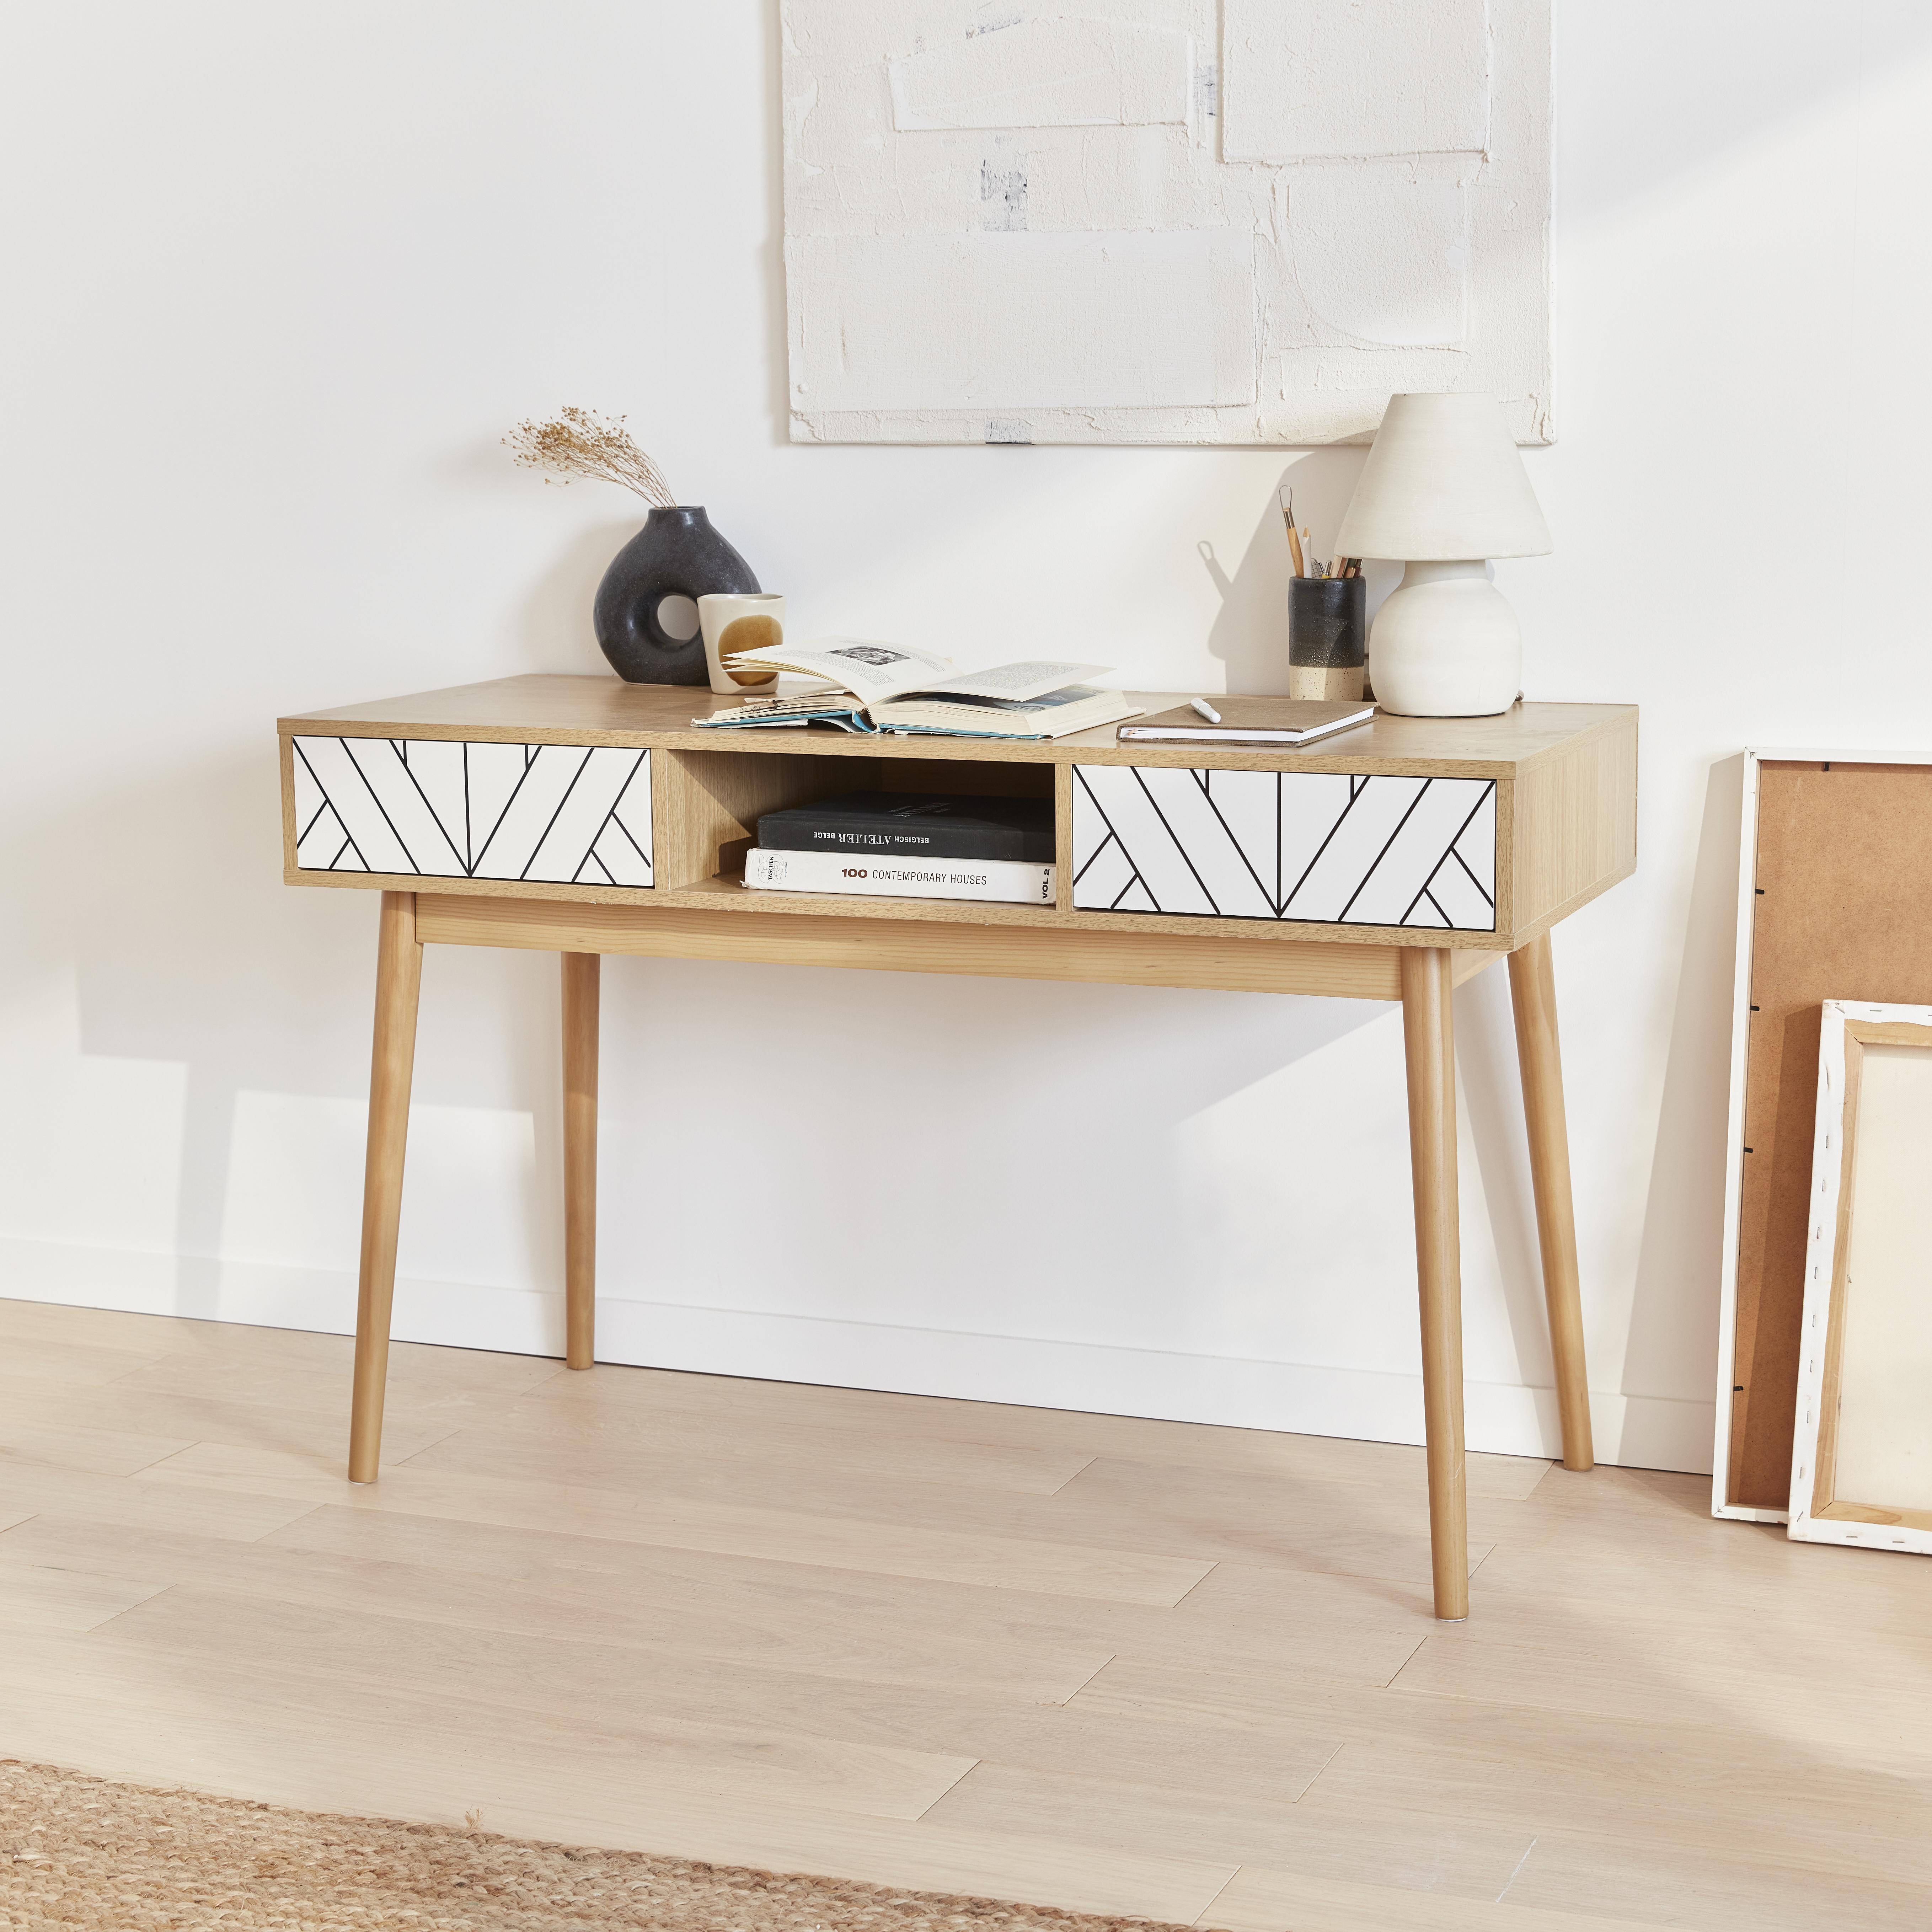 Wood-effect console table with two drawers and one storage nook, 120x48x75cm - Mika - White,sweeek,Photo2